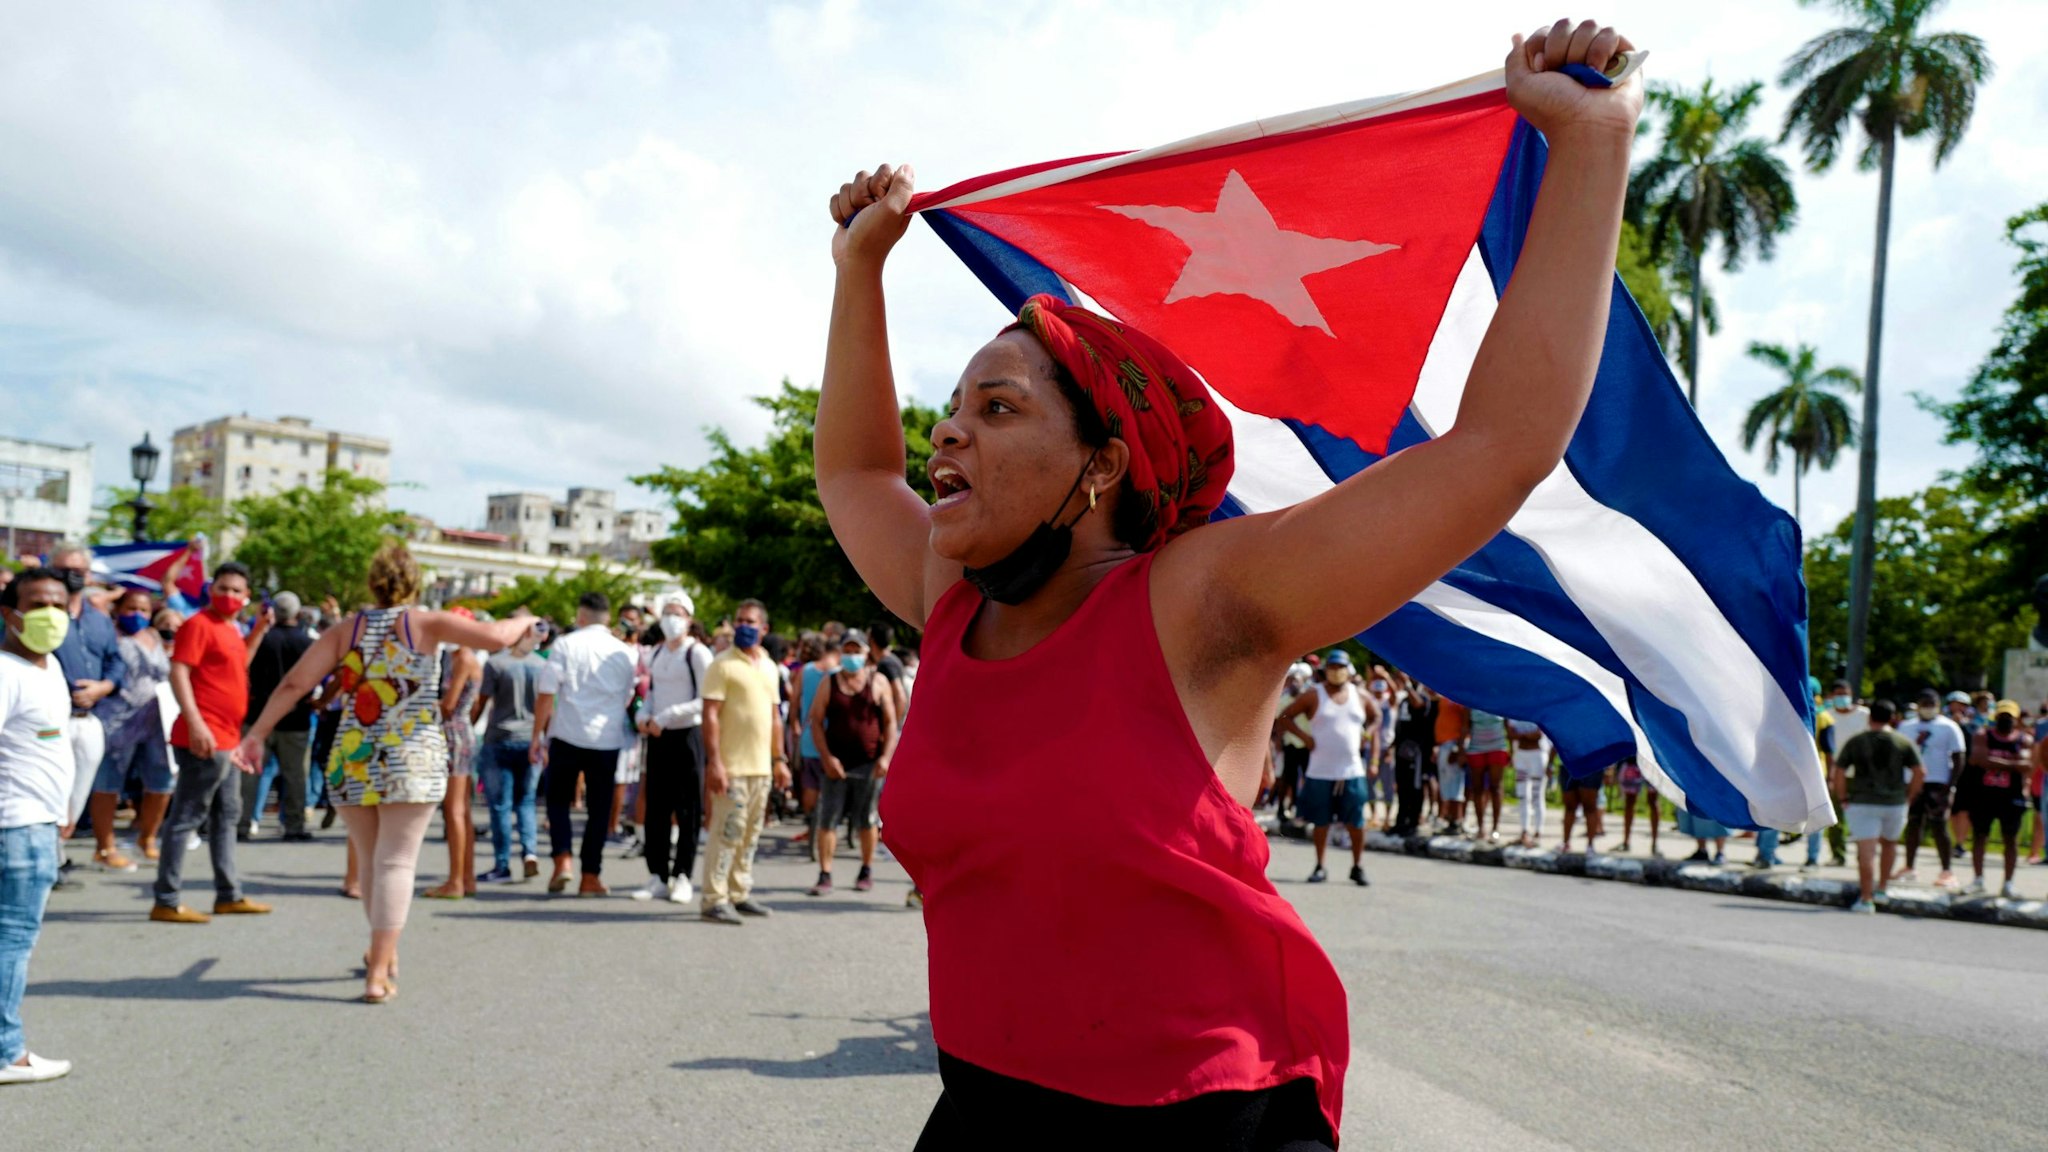 A pro-government woman is seen during a demonstration against the government of Cuban President Miguel Diaz-Canel in Havana, on July 11, 2021. - Thousands of Cubans took part in rare protests Sunday against the communist government, marching through a town chanting "Down with the dictatorship" and "We want liberty."